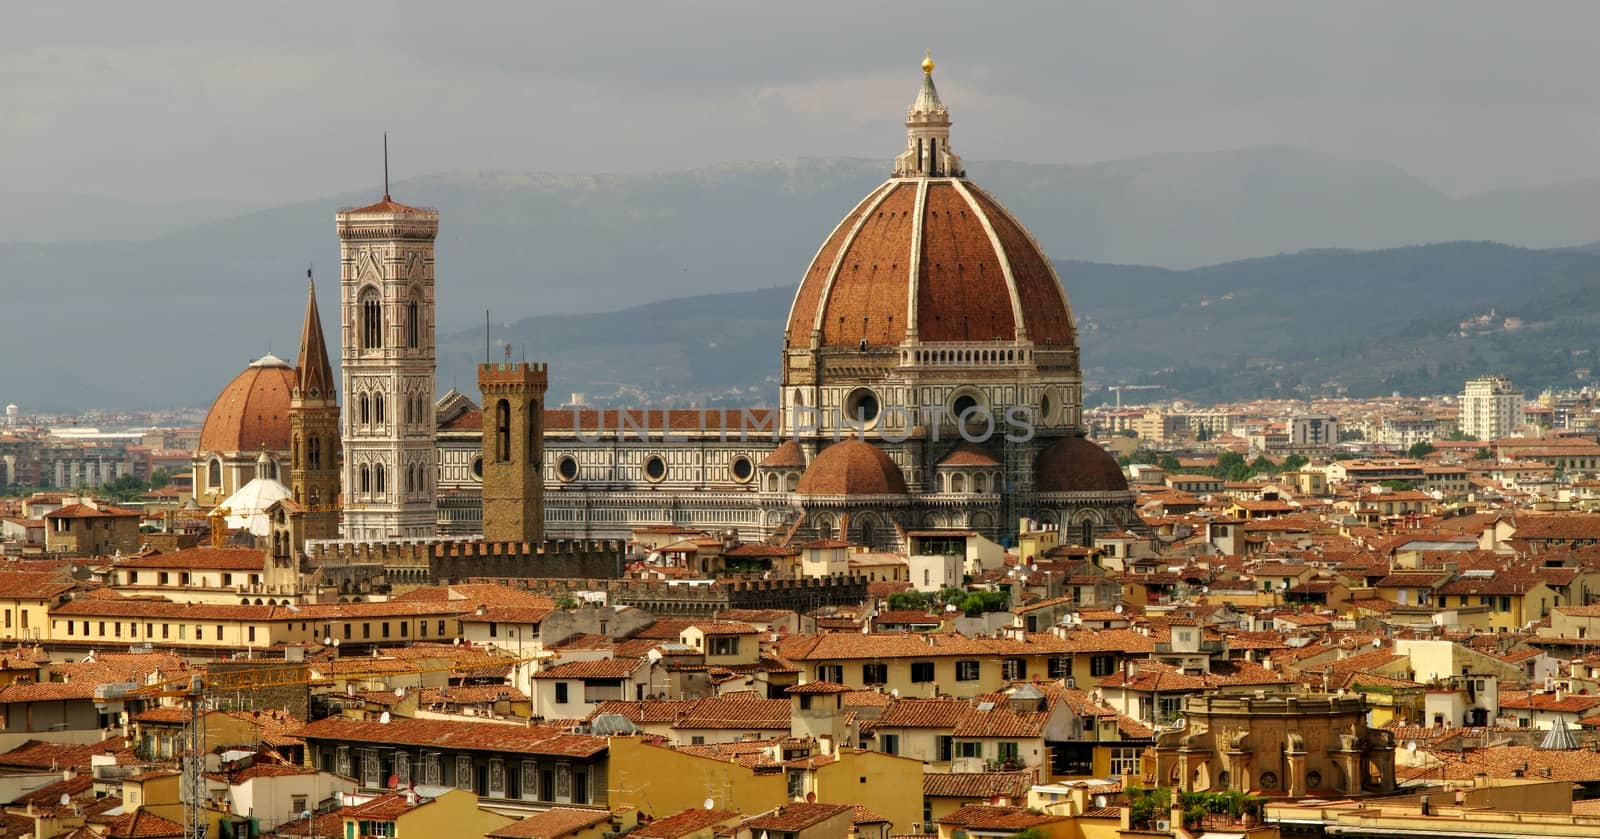 Florence  Cathedral  Basilica   of Saint Mary of the Flower by sanzios